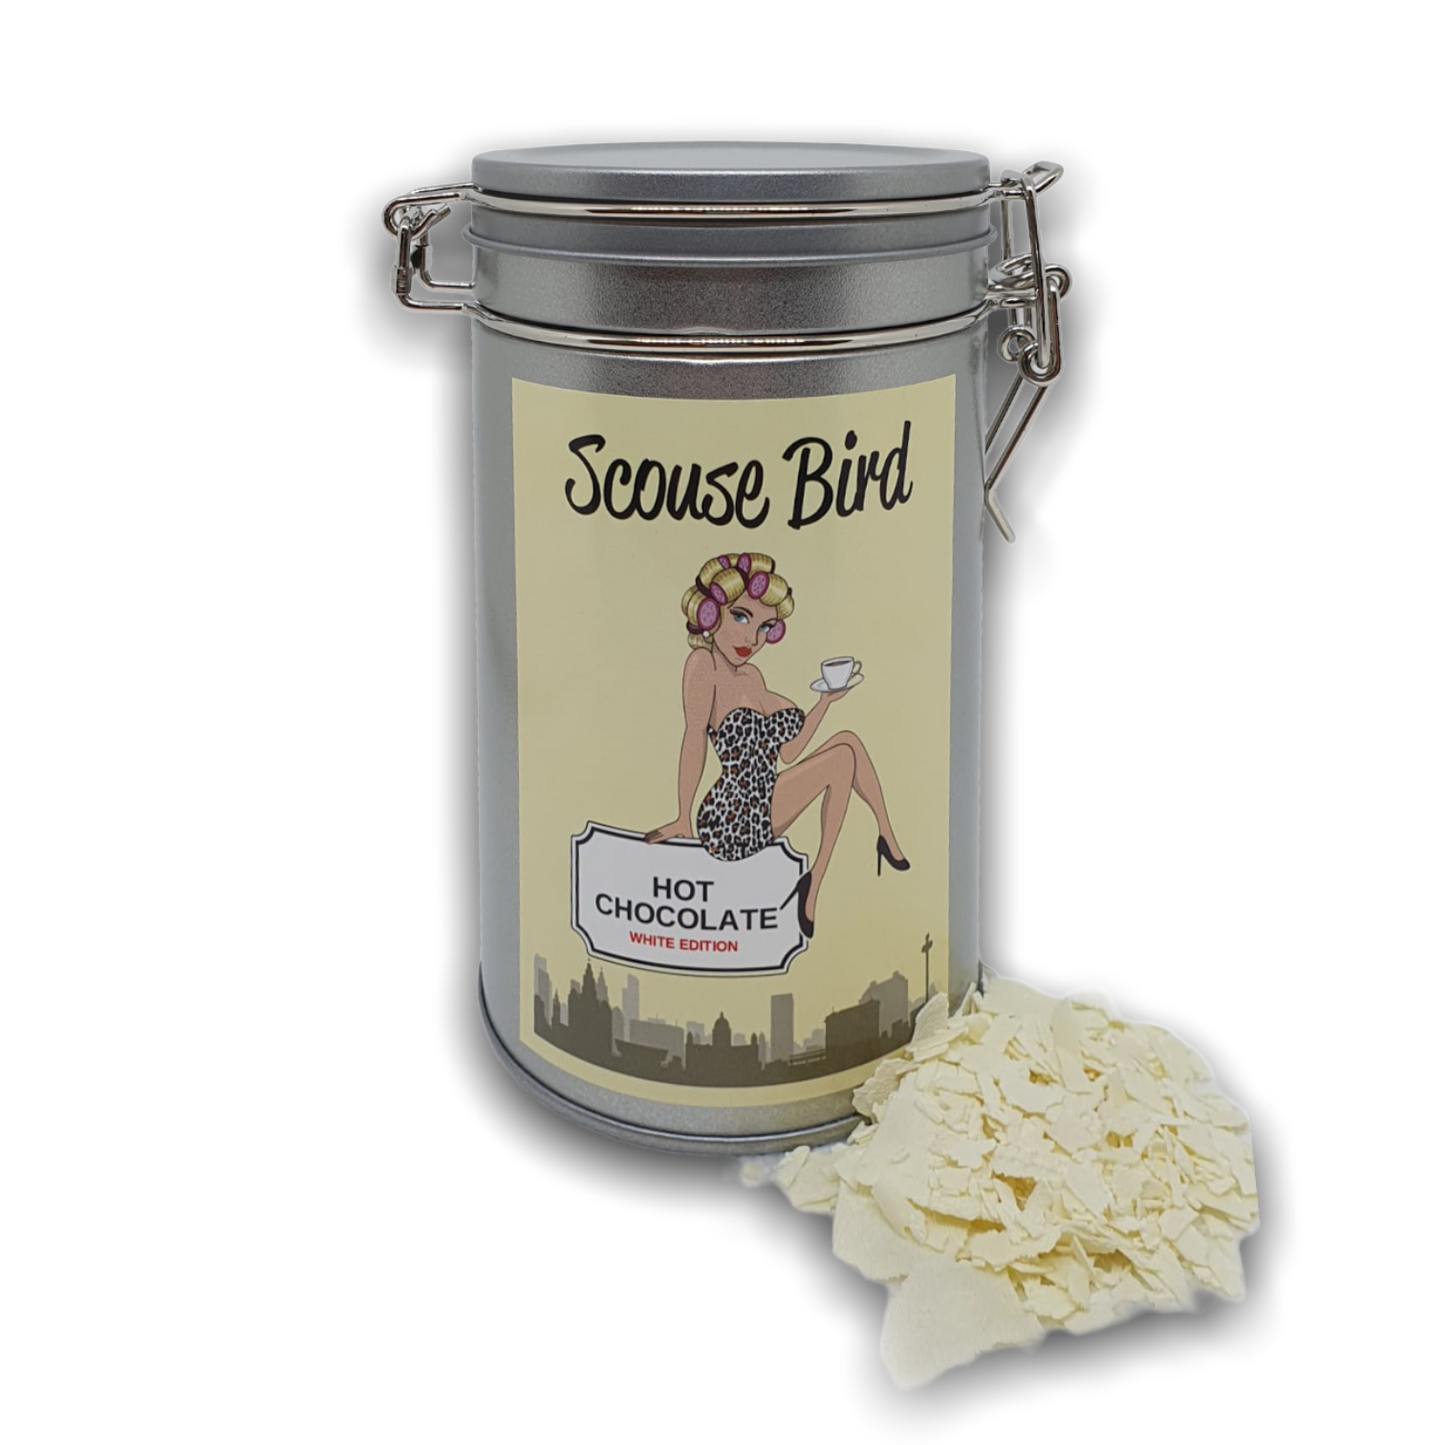 Scouse Bird Real Hot Chocolate (200g) - White